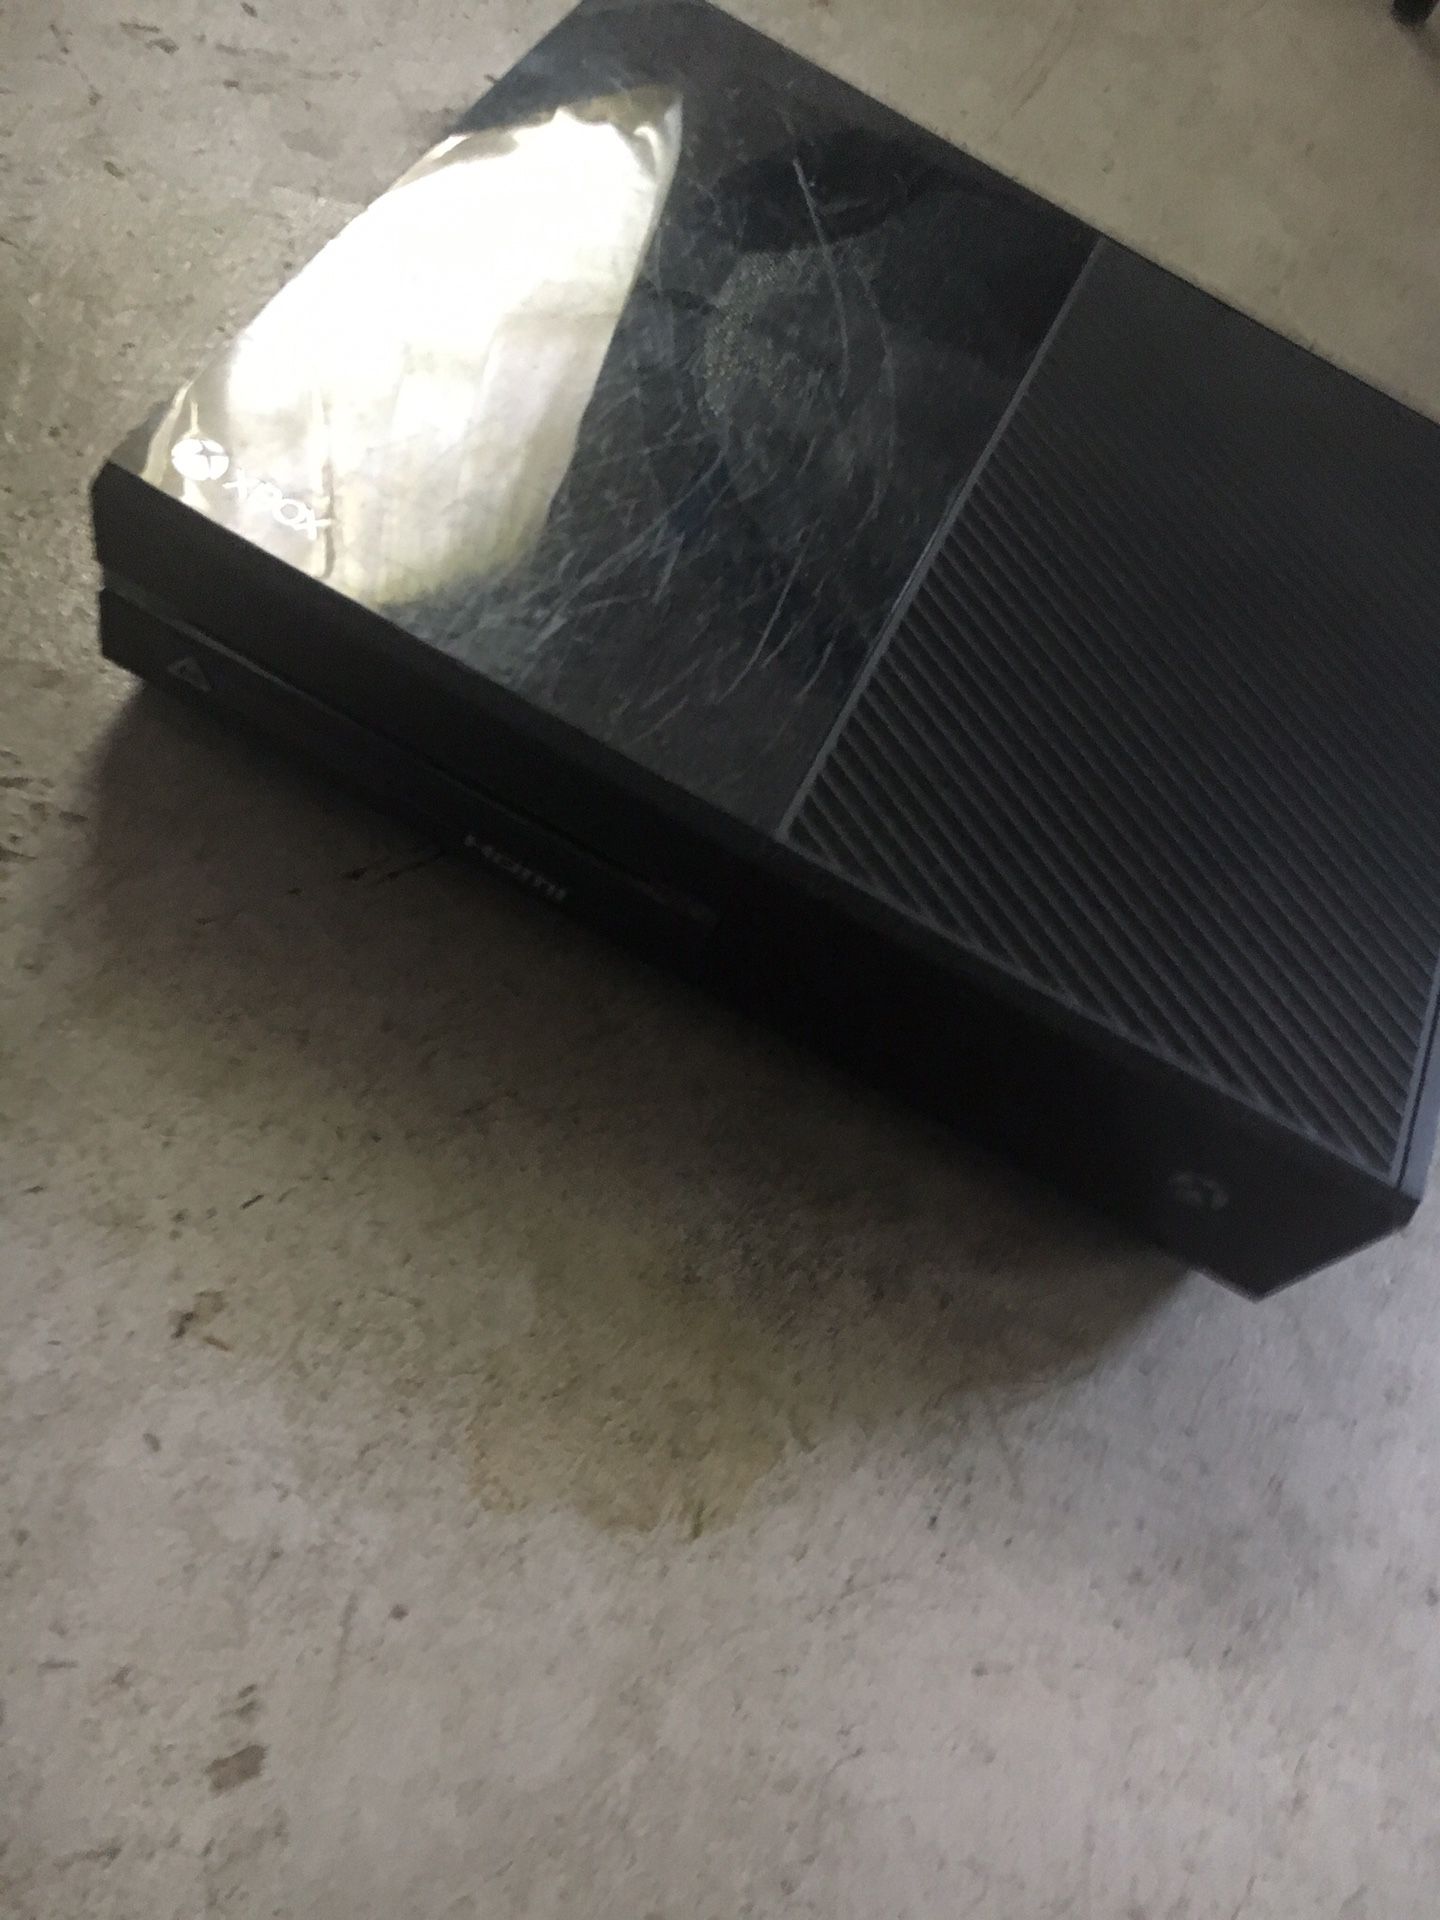 Xbox one with a headphone and mic and Kinect and 3 games including gta 5, fifa 19, and fifa 17